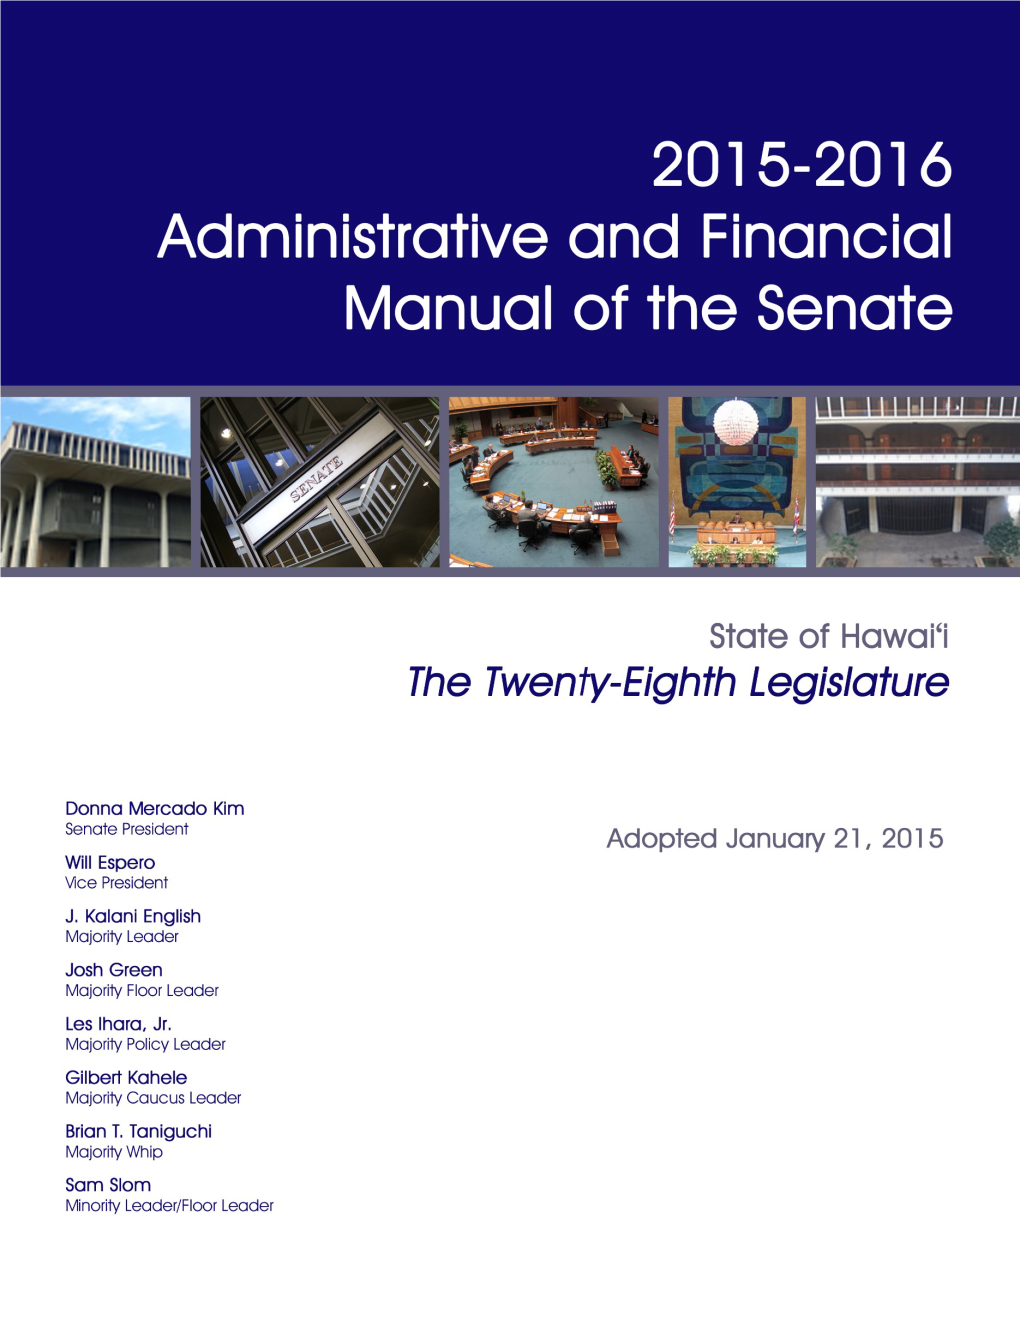 Administrative and Financial Manual of the Senate